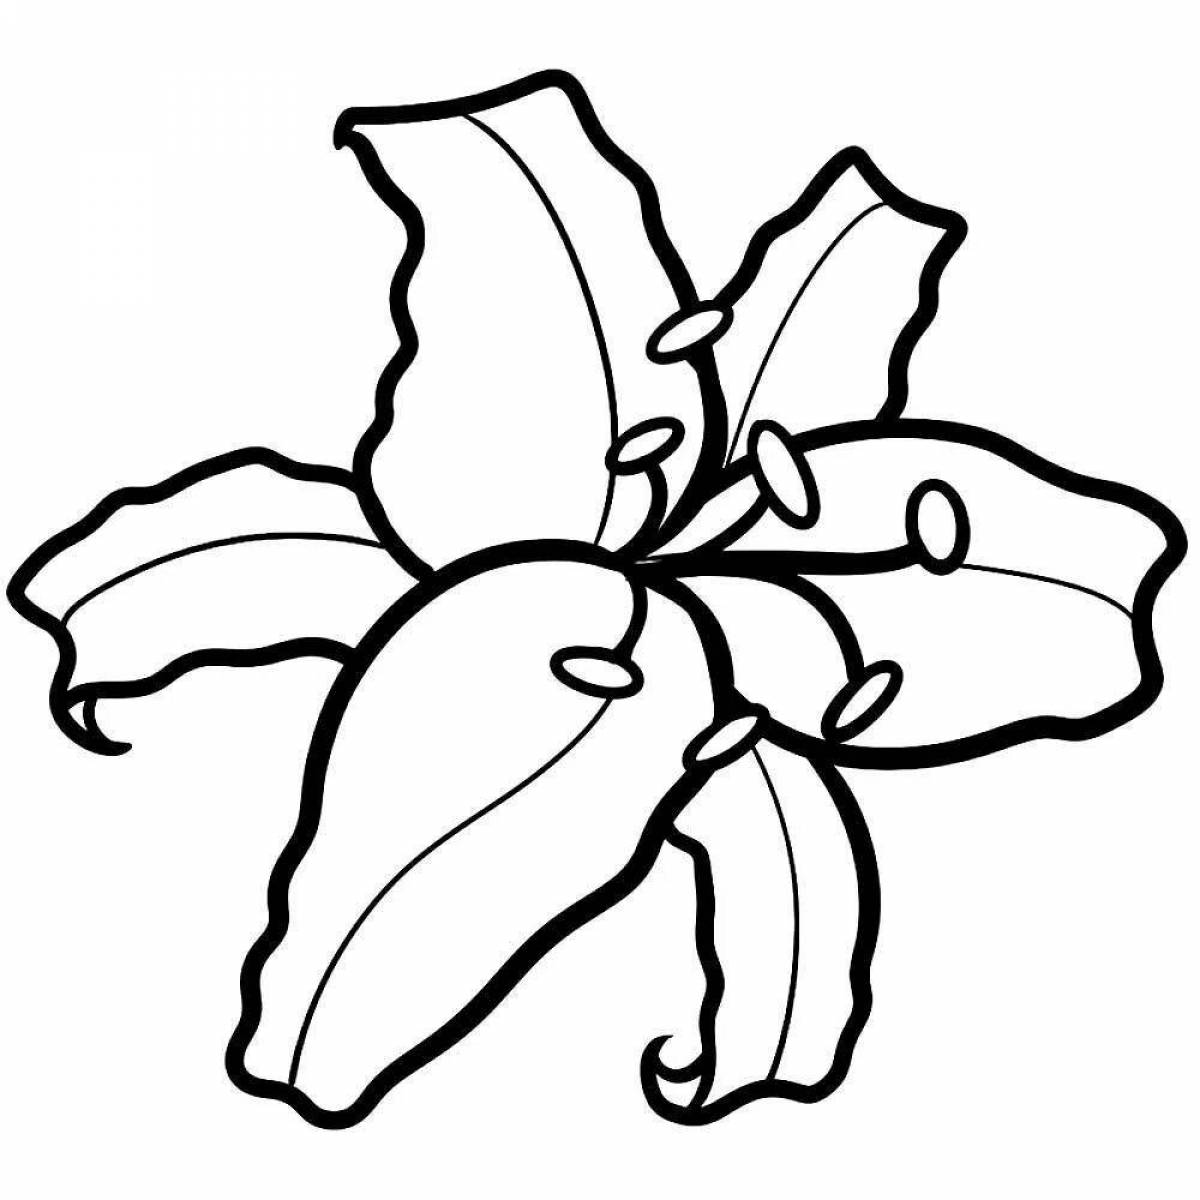 Exquisite lily flower coloring page